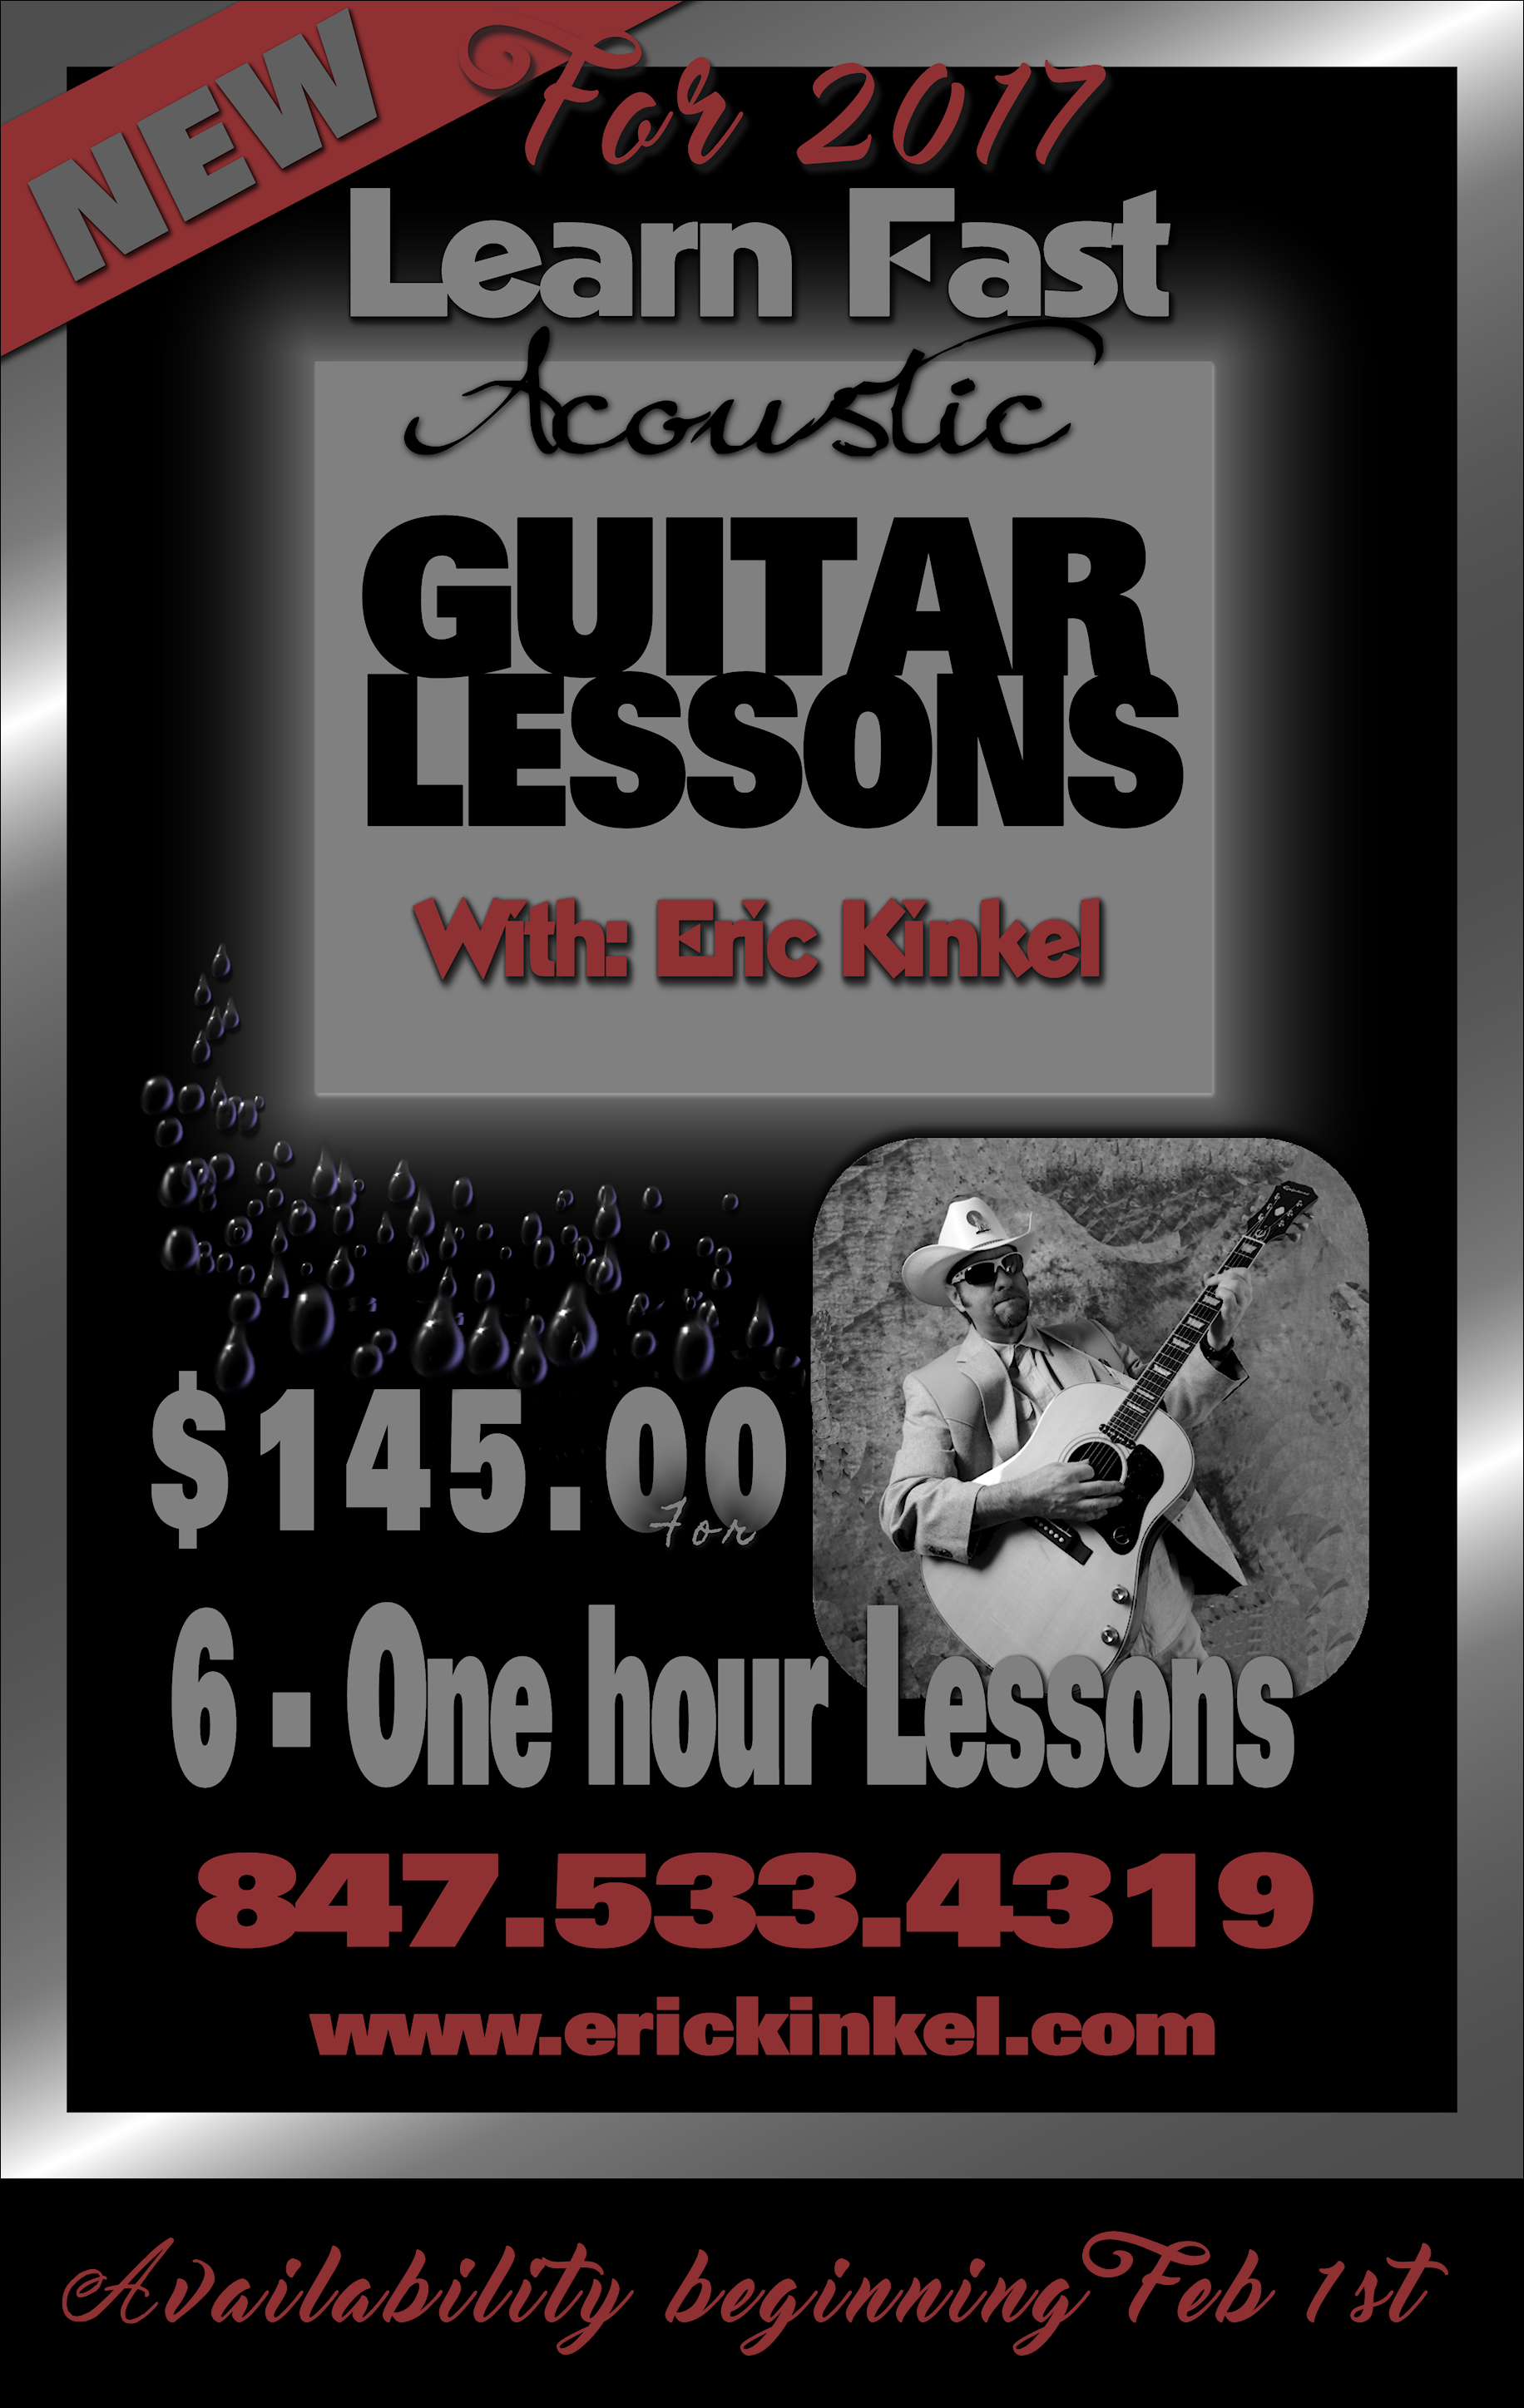 Acoustic Guitar Lesssons by Eric Kinkel 2017 ad